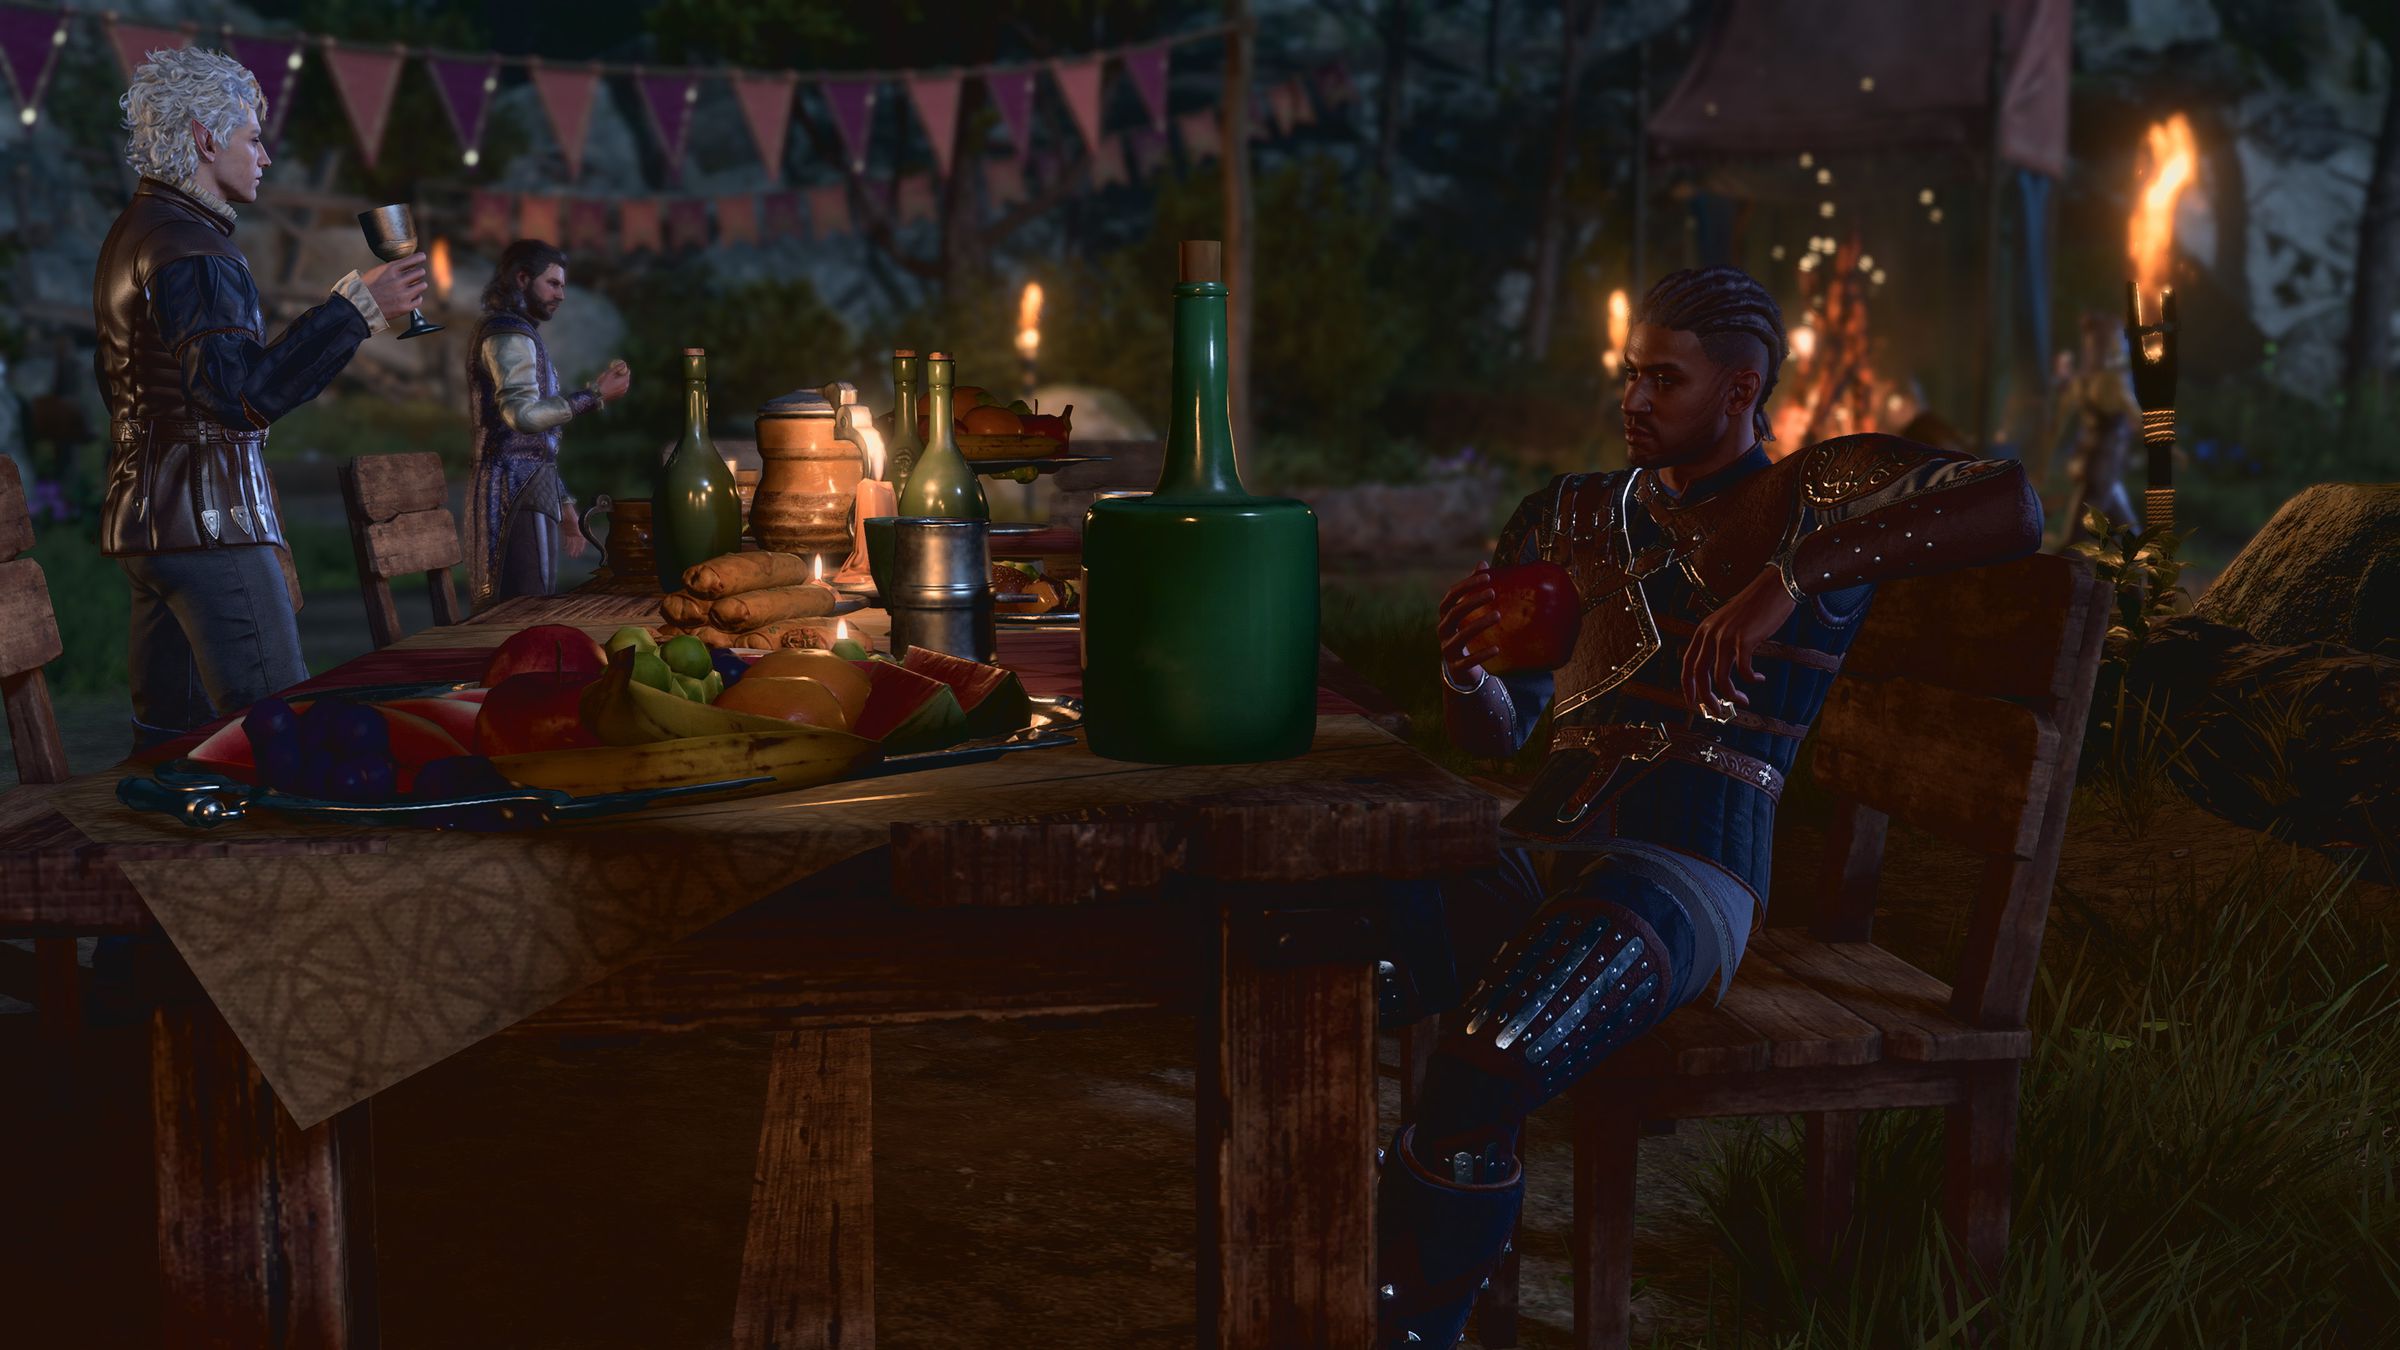 Screenshot from Baldur’s Gate 3 featuring the character Wyll in new camp clothes sitting at a table covered in food and wine for a feast while the character Astarion holds a goblet of wine in the background.